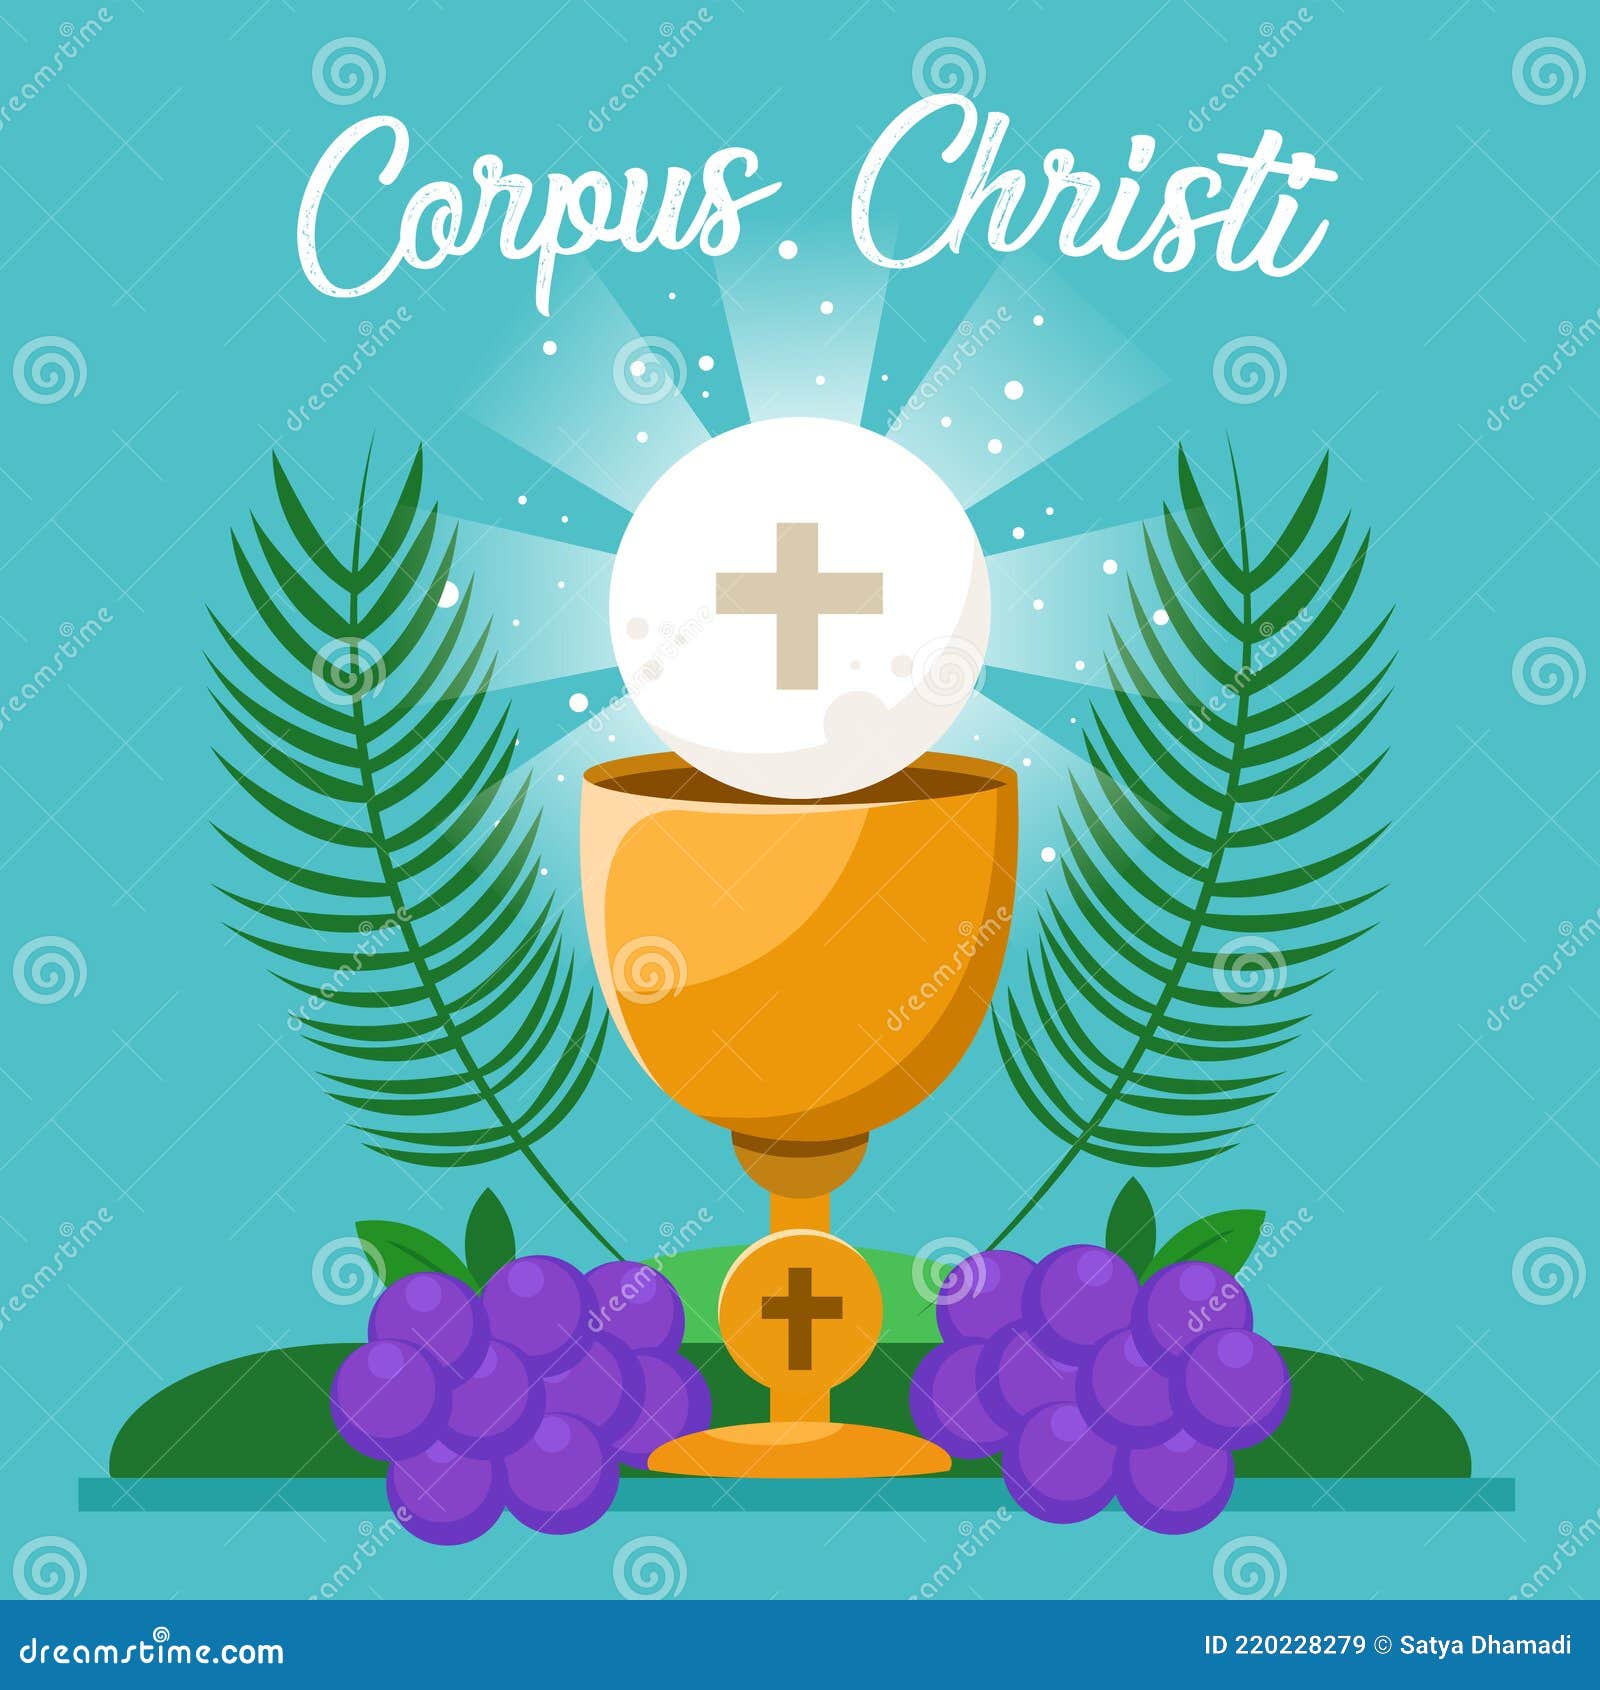 Corpus Christi Catholic Religious Holiday Greeting Card, Vector  Illustration of Template for Your Corpus Christi Design Stock Vector -  Illustration of palm, easter: 220228279